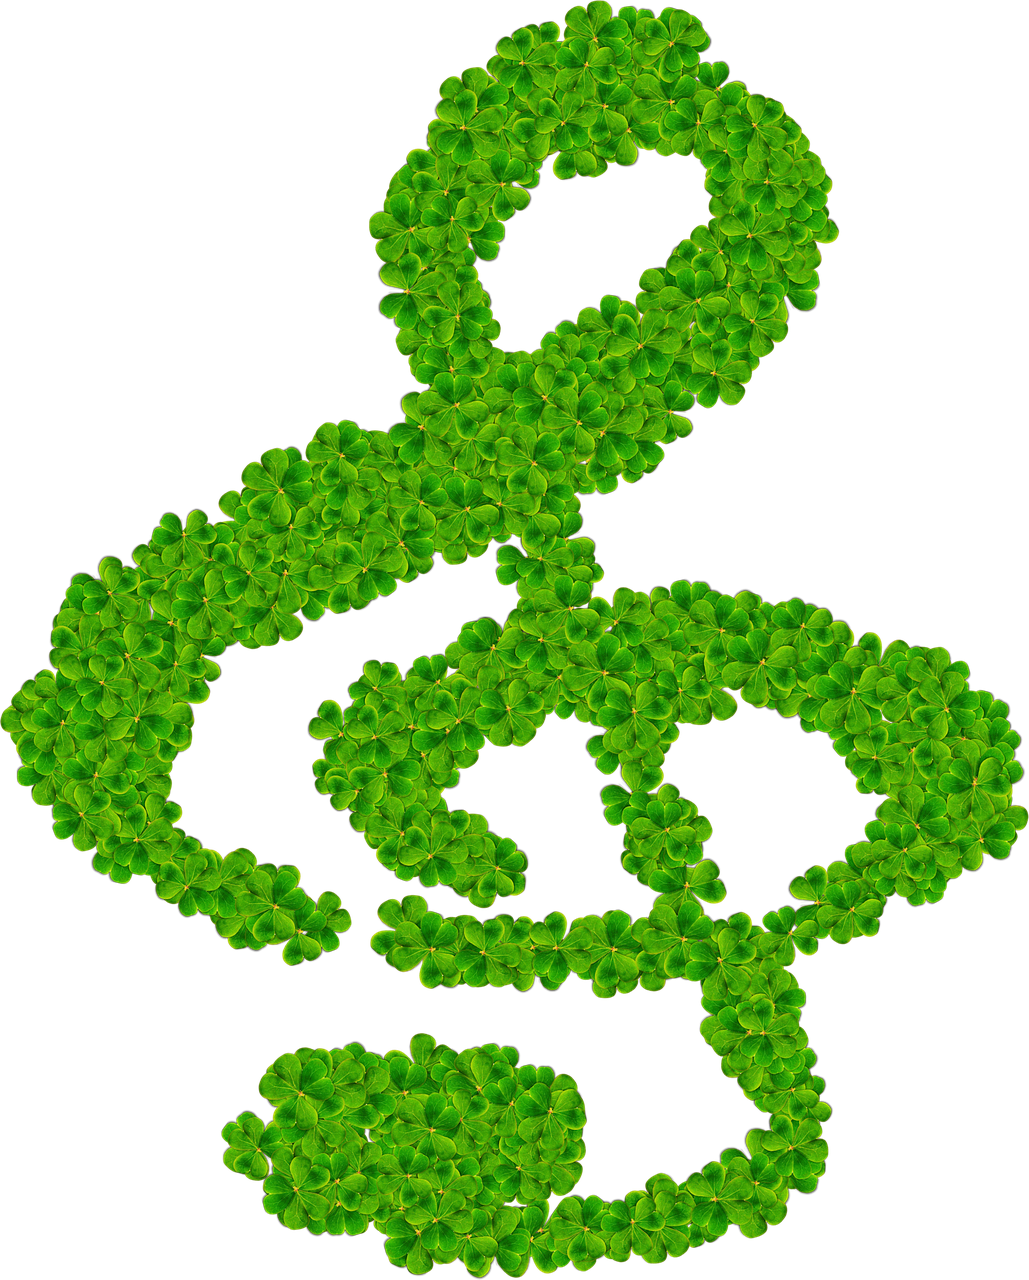 a treble made out of shamrock leaves, a digital rendering, generative art, piano guitar music notes key, spiralling bushes, bio chemical illustration, amusing